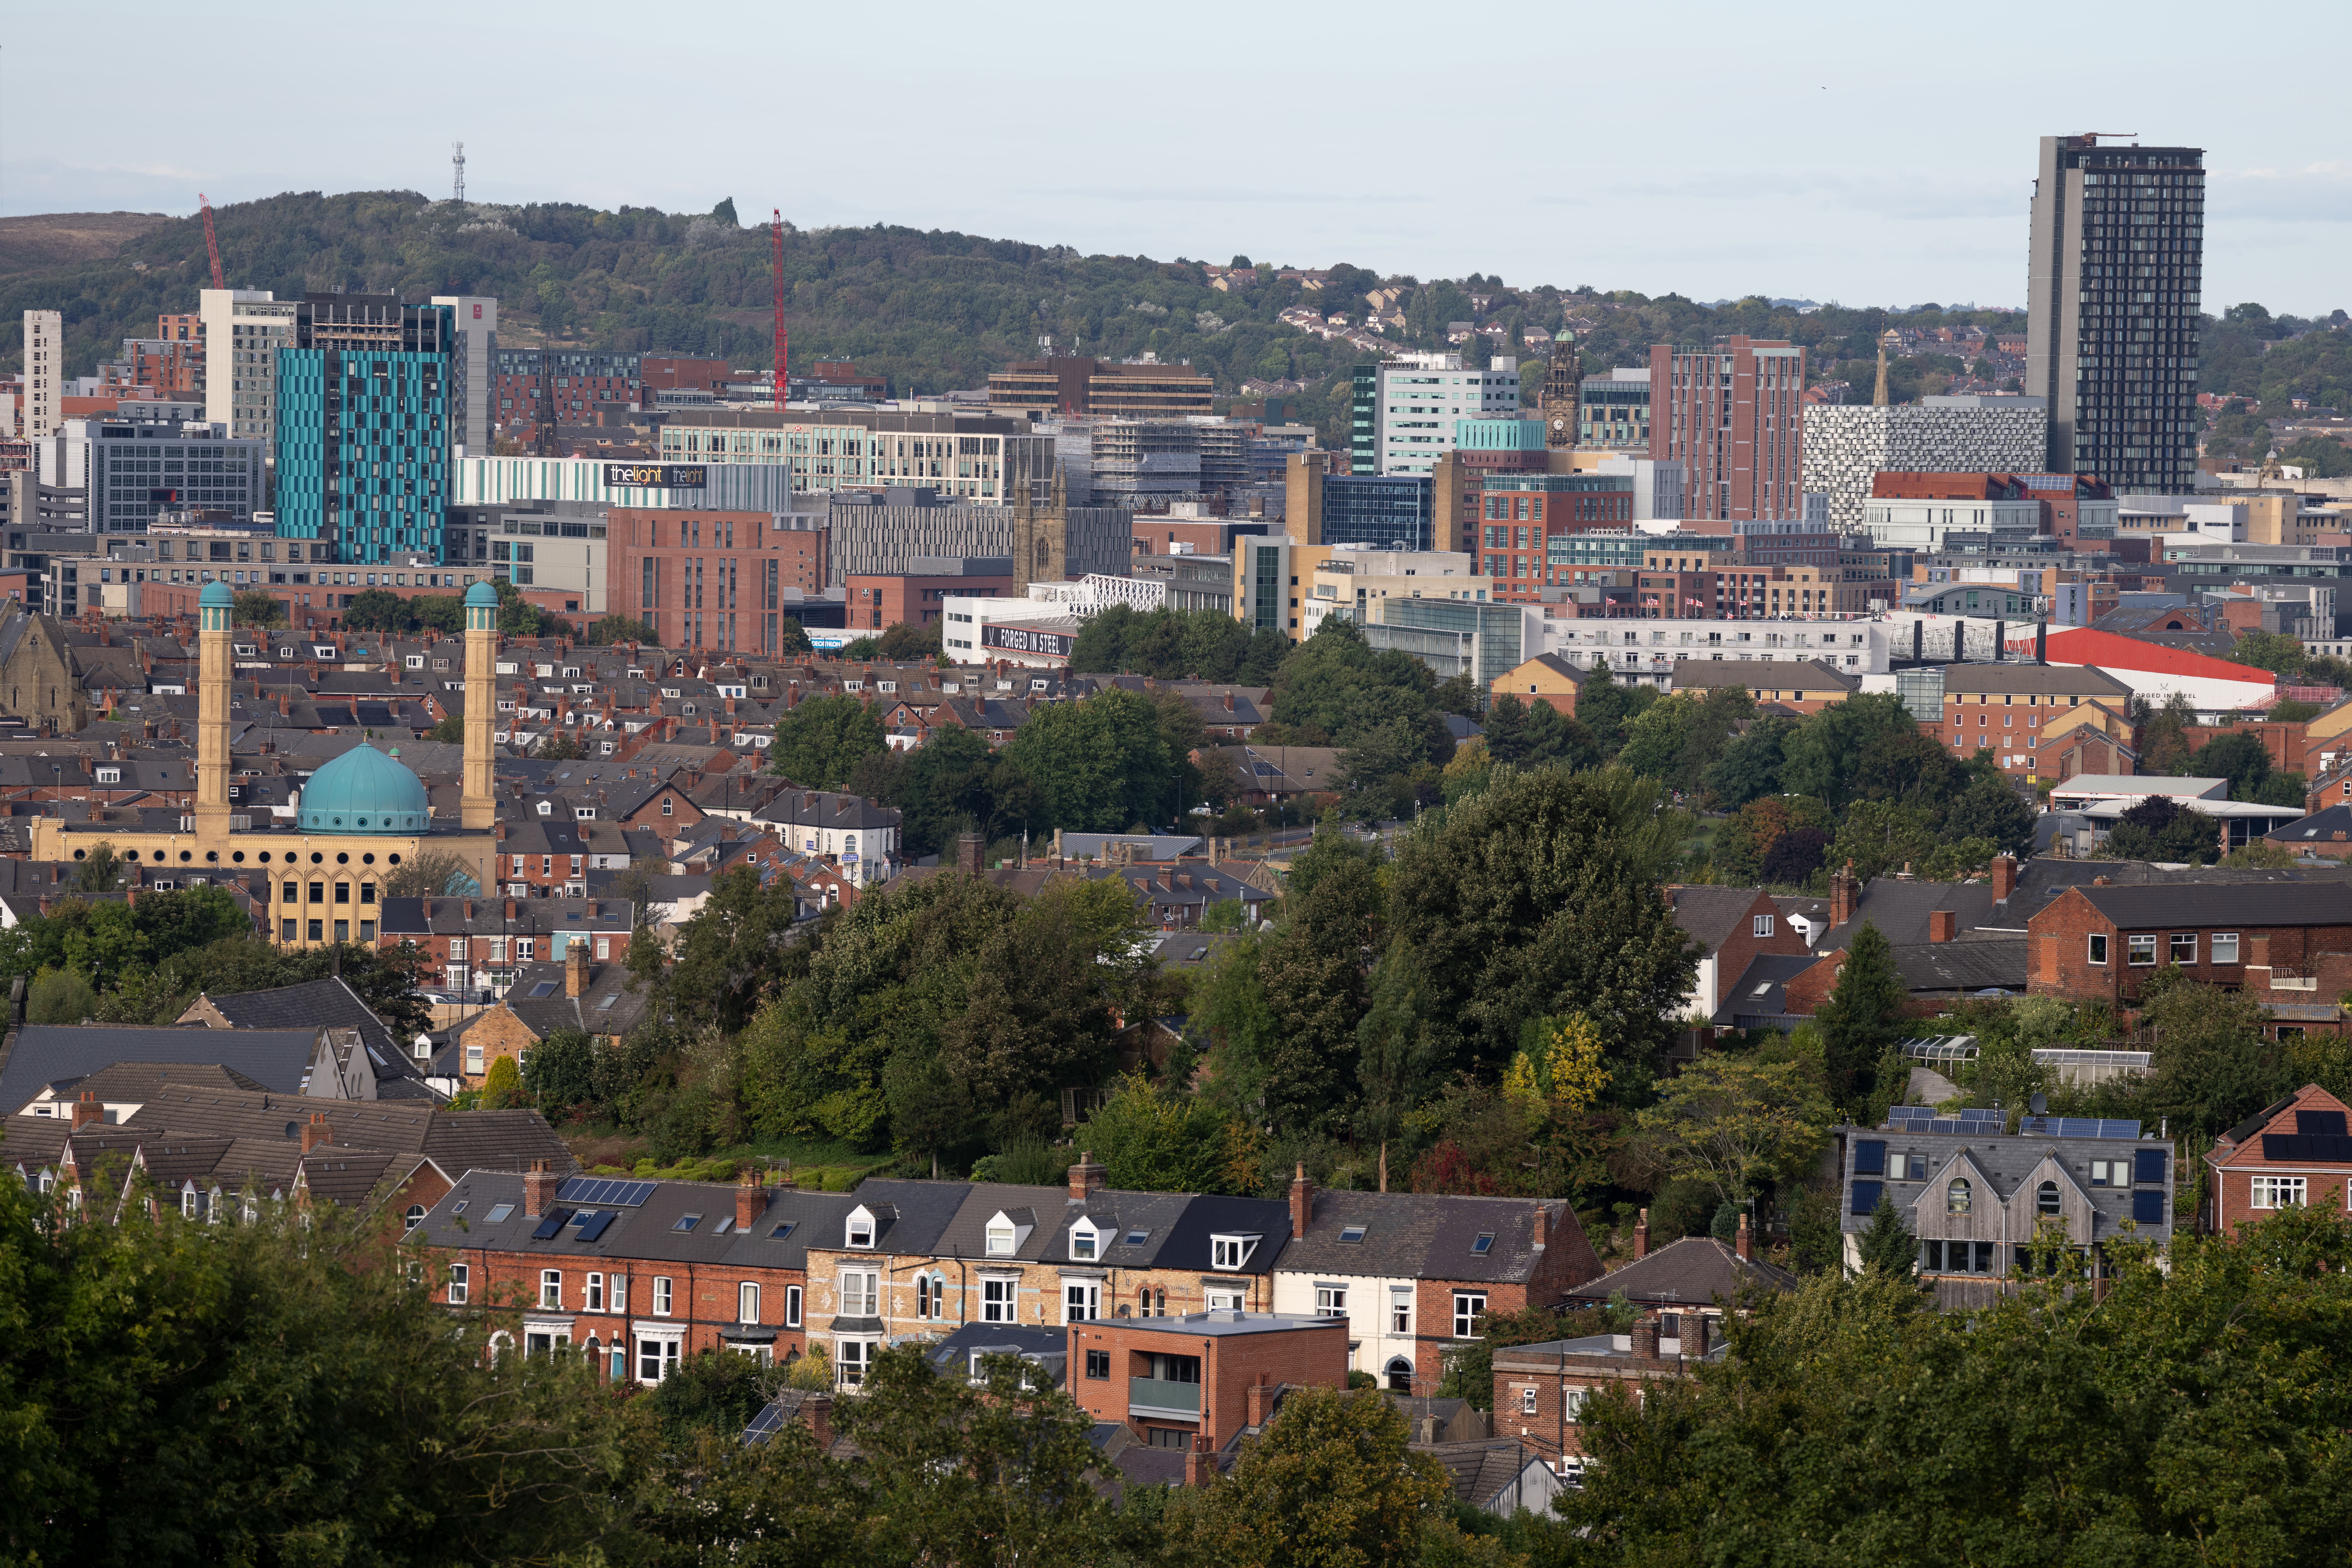 Sheffield from Meersbrook Park, 1/640s, f/5, ISO100, Sony 70-200mm at 200mm, with Sony A1, ACR